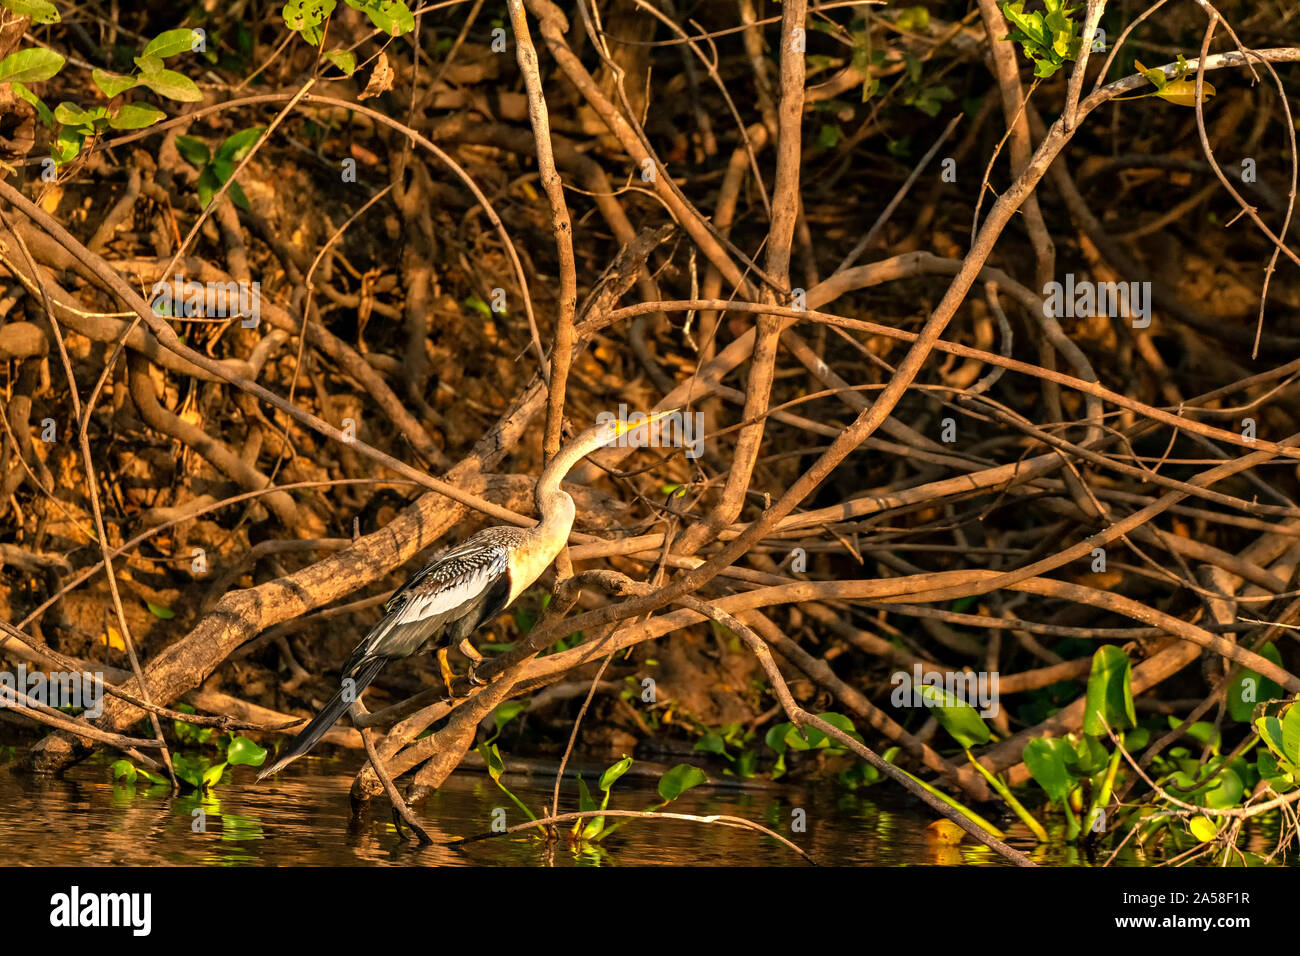 Heron In The Branches Stock Photo